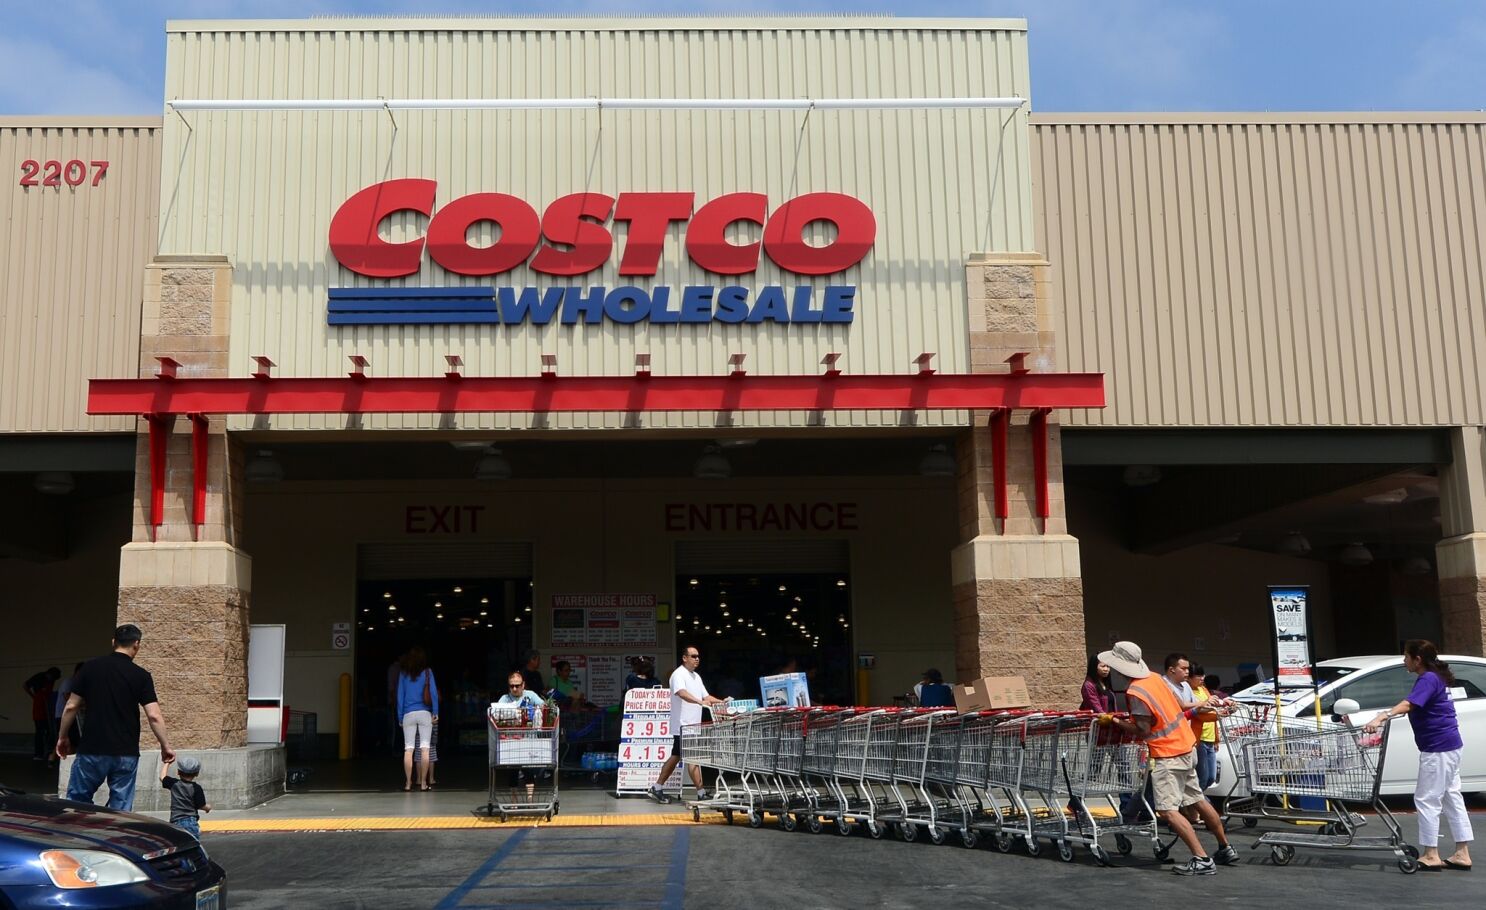 Supermarkets and Costco specifically. Or maybe this was just me because I grew up poor and my parents never let me get anything I wanted, just tag along and watch them buy staples. u/bulletPoint